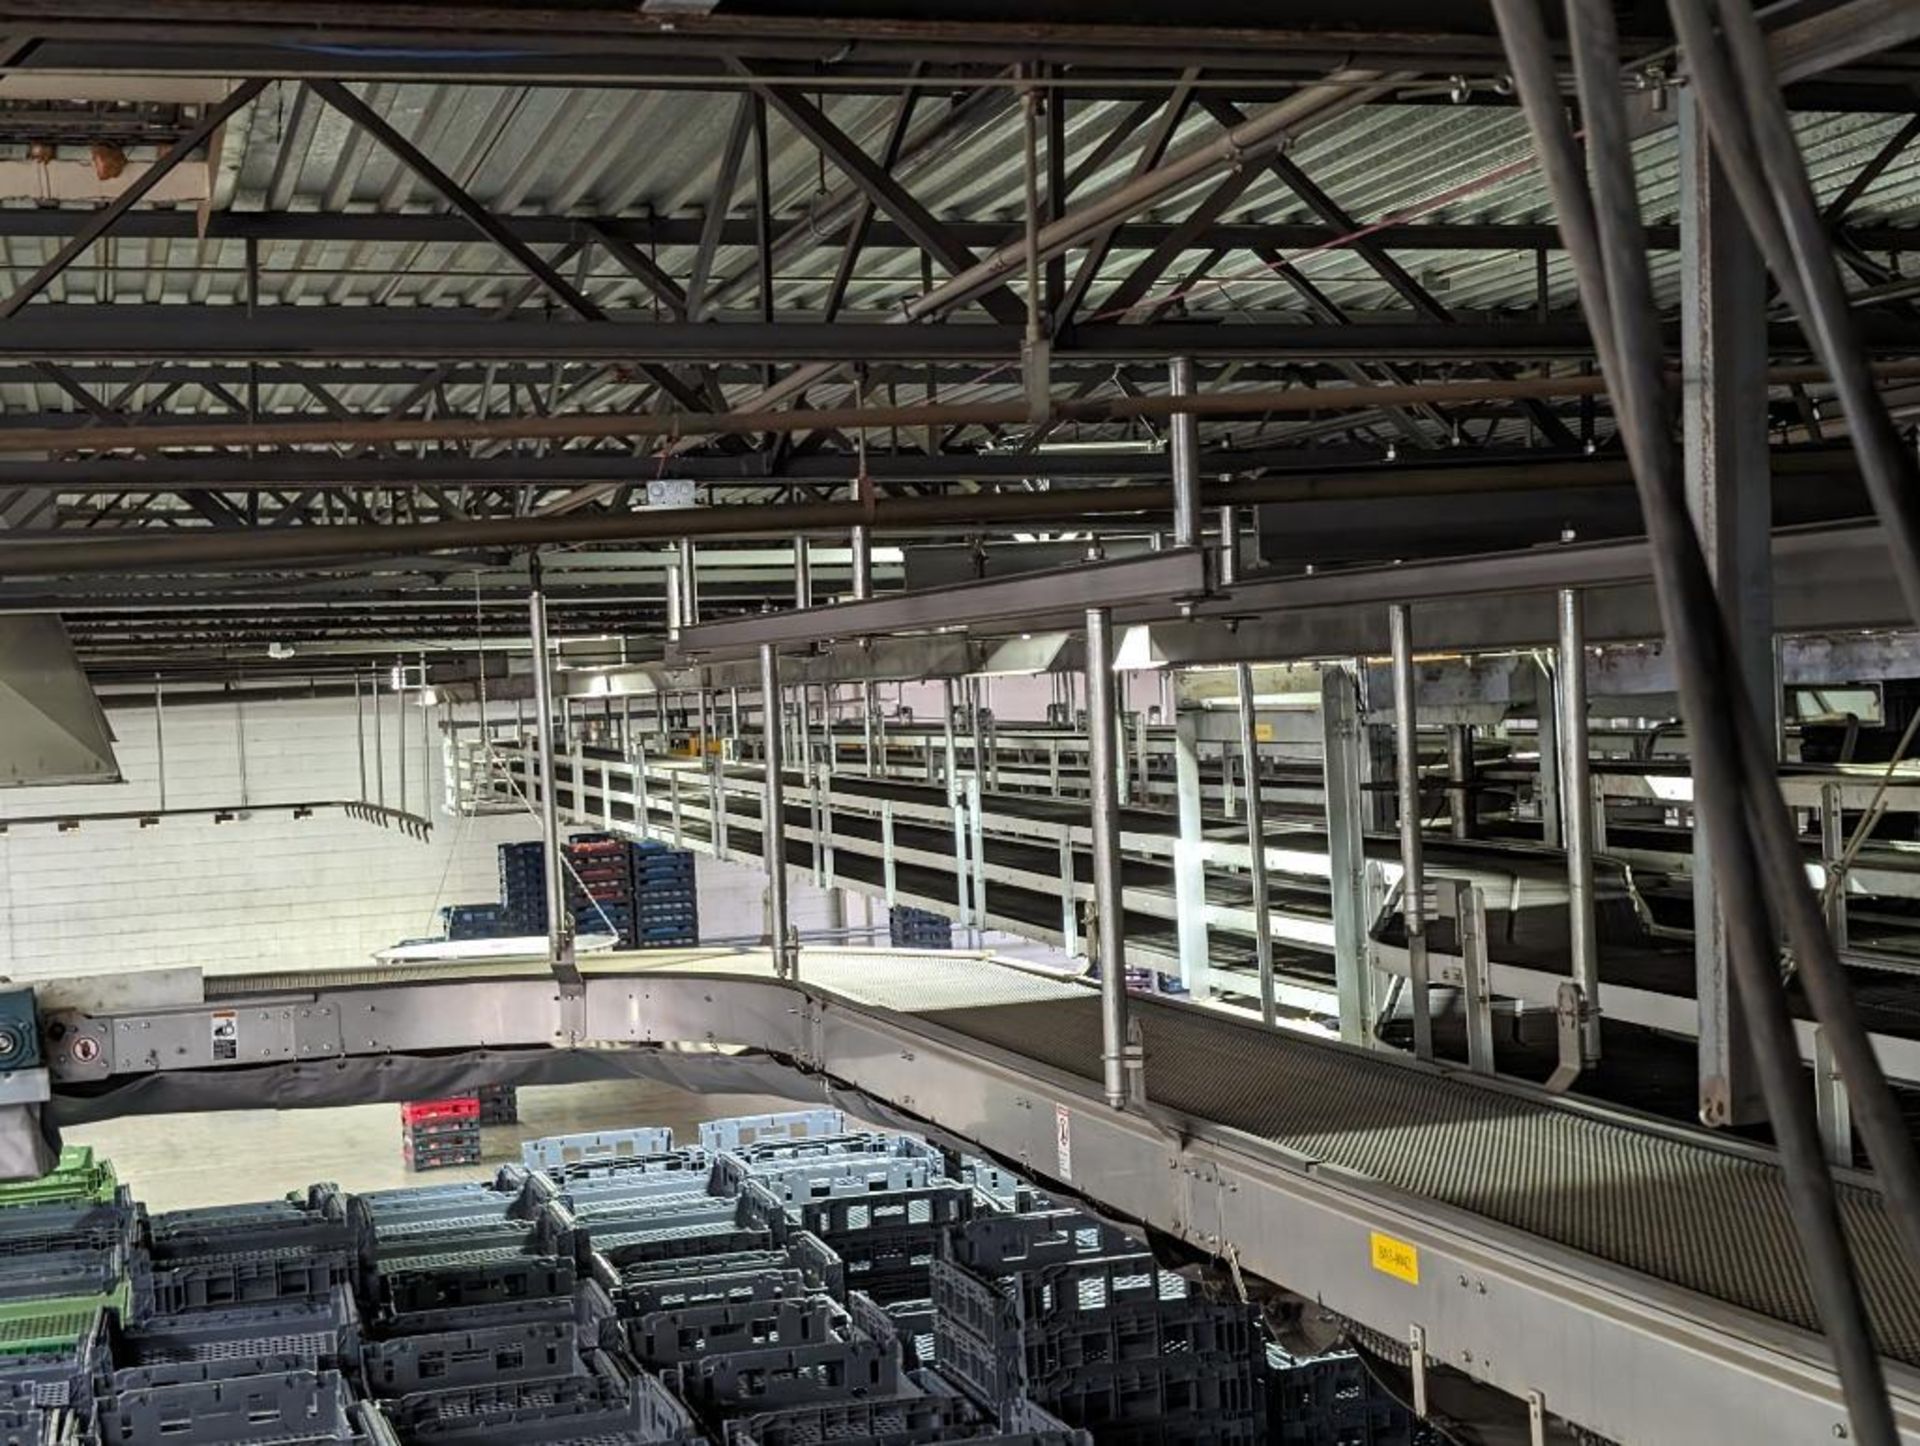 Stewarts Systems racetrack cooling conveyor - Image 10 of 21